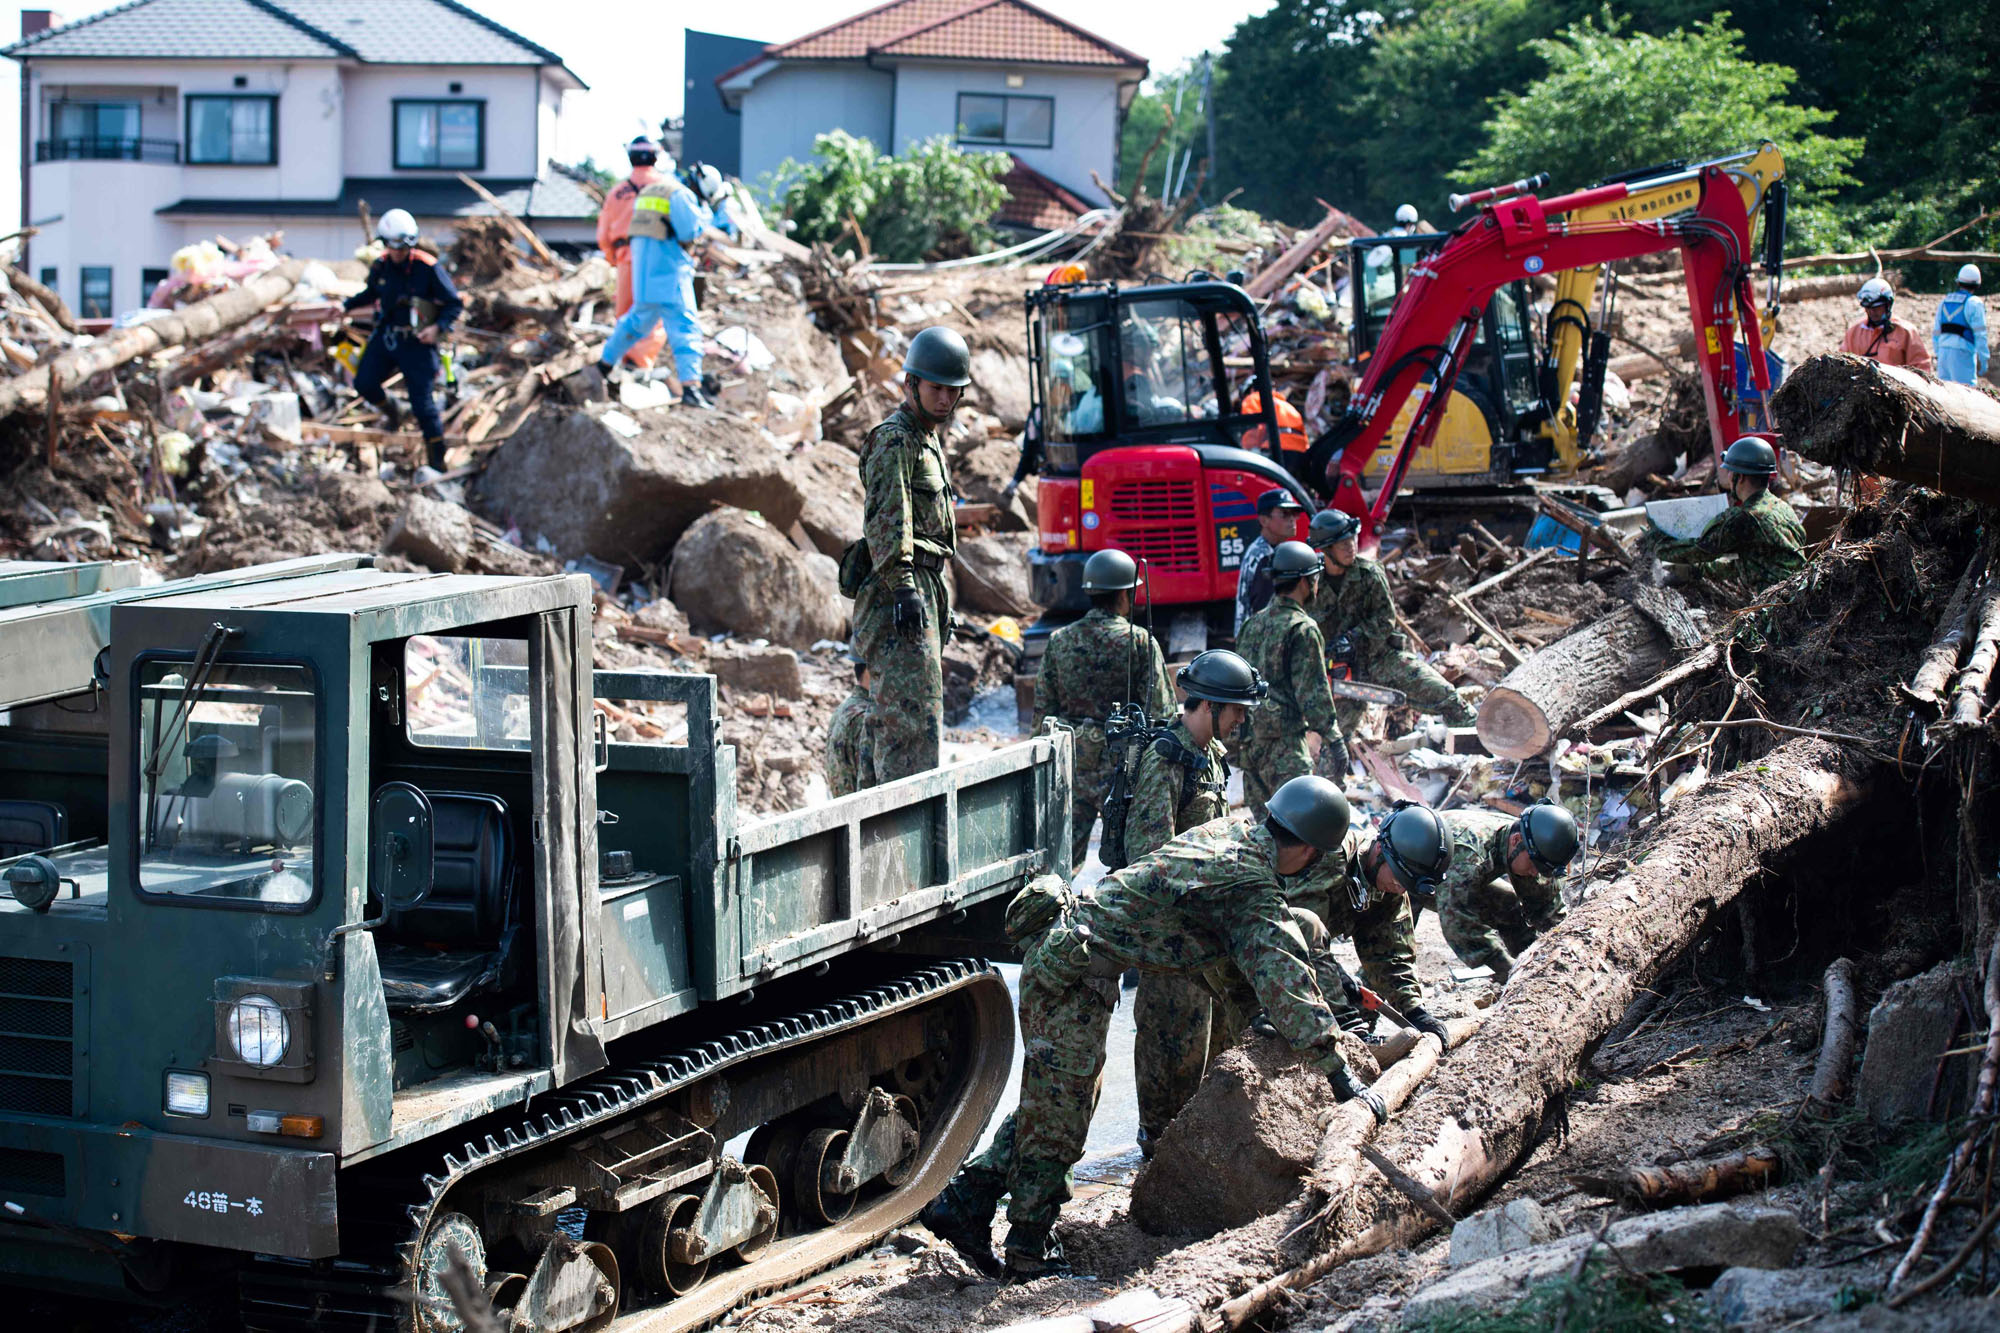 Rescue workers and soldiers clear debris from a street in a flood-hit area in Kumano, Hiroshima Prefecture, on Monday. Torrential rain across western Japan has forced some automakers and other companies to suspend operations. | AFP-JIJI